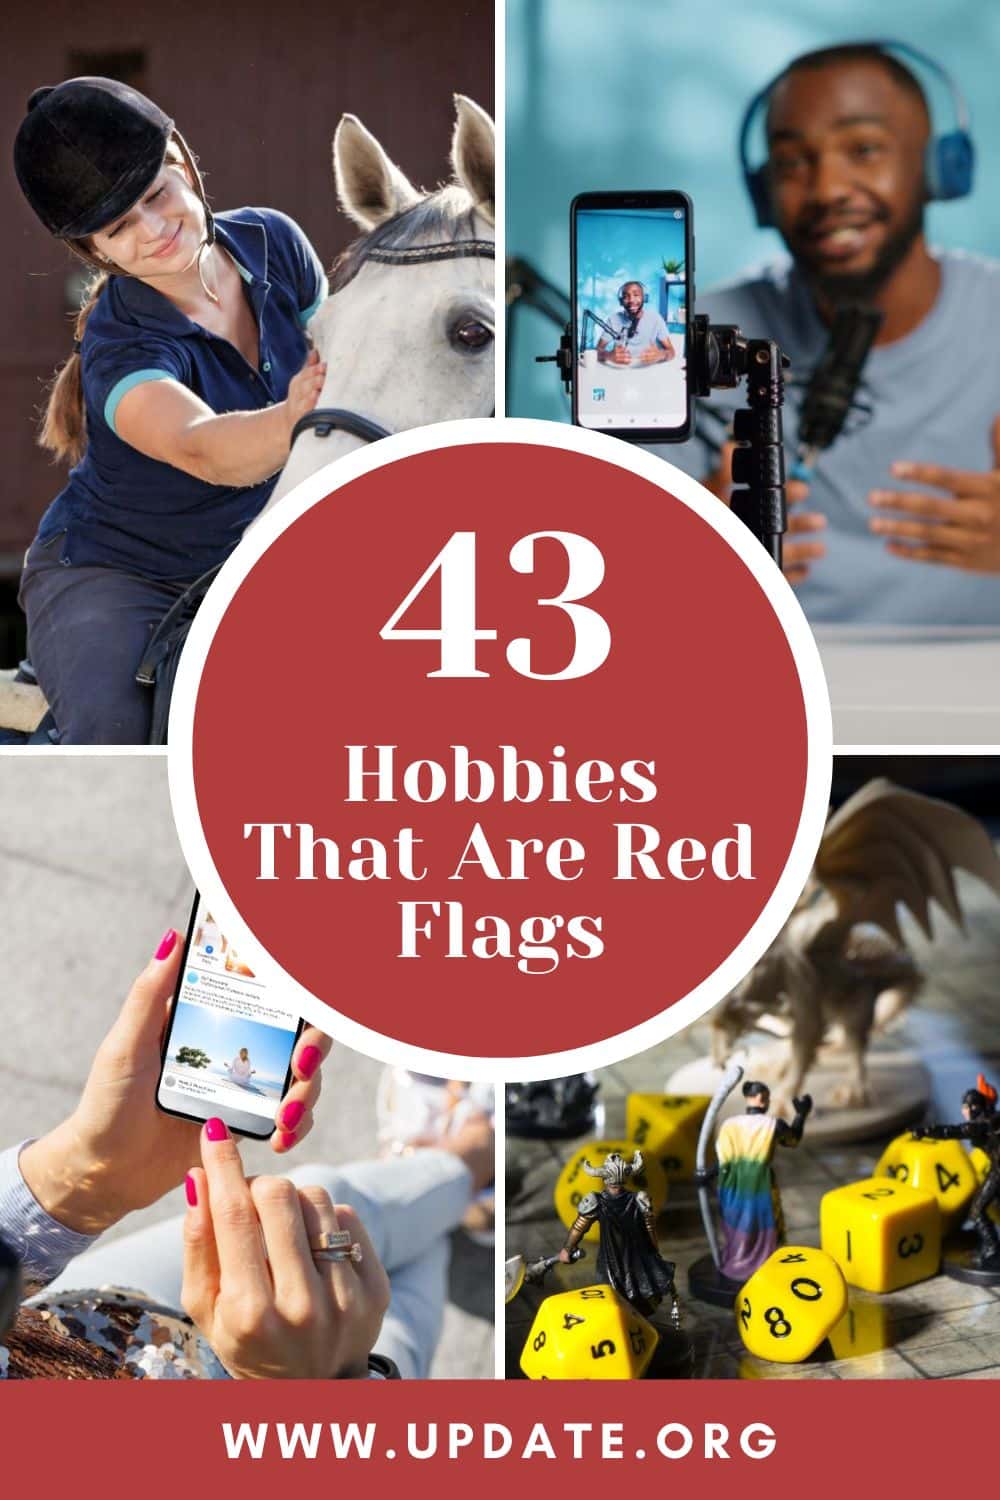 43 Hobbies That Are Red Flags pinterest image.